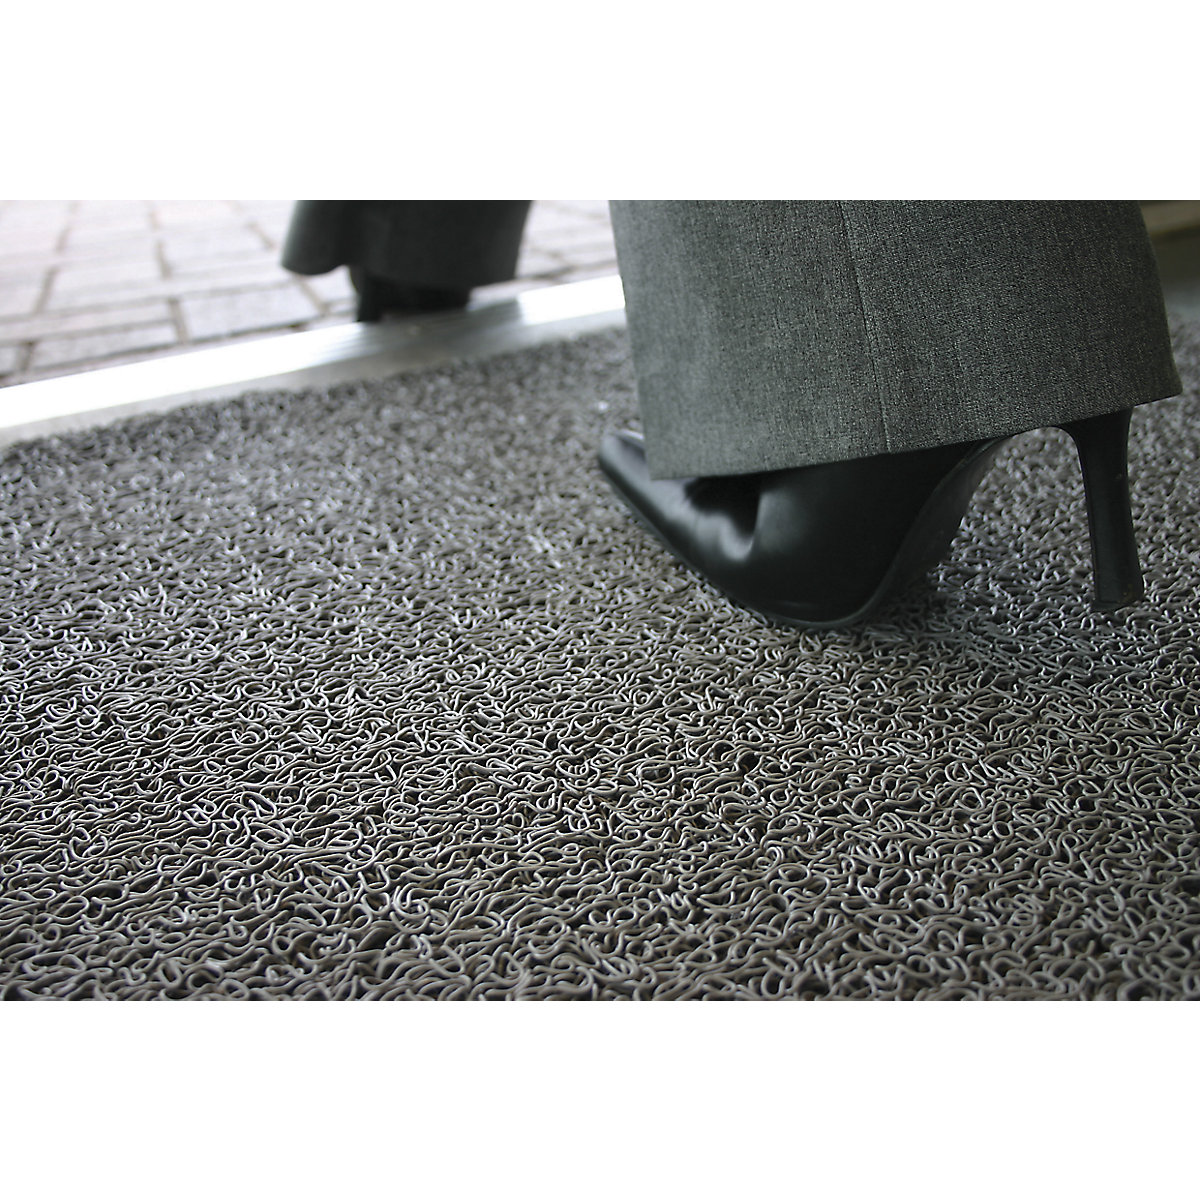 Entrance matting, flame resistant, width 1200 mm, sold by the metre, grey